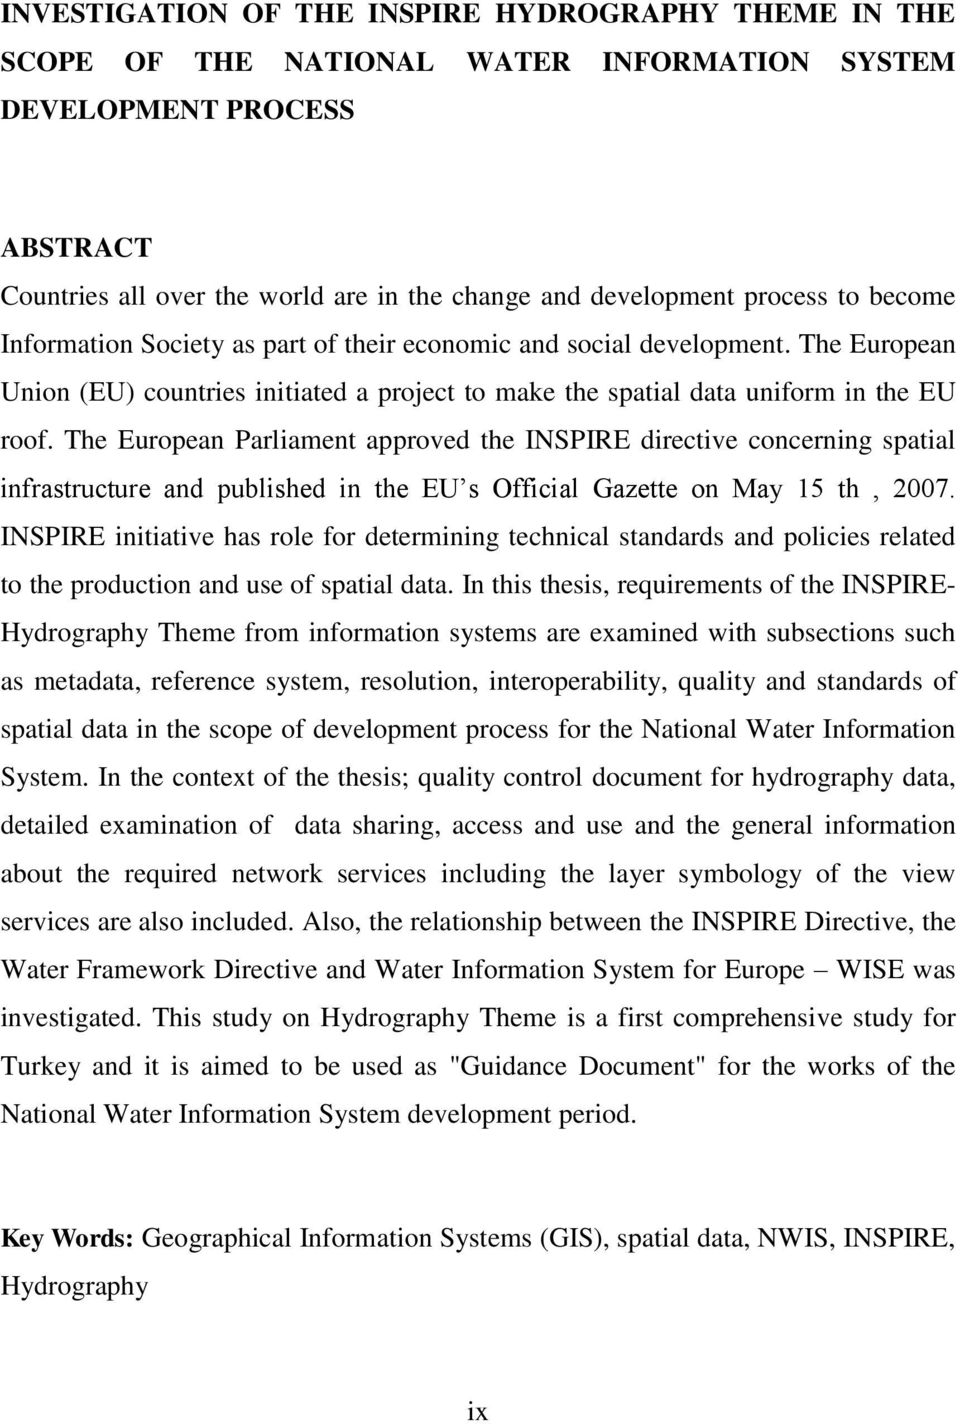 The European Parliament approved the INSPIRE directive concerning spatial infrastructure and published in the EU s Official Gazette on May 15 th, 2007.